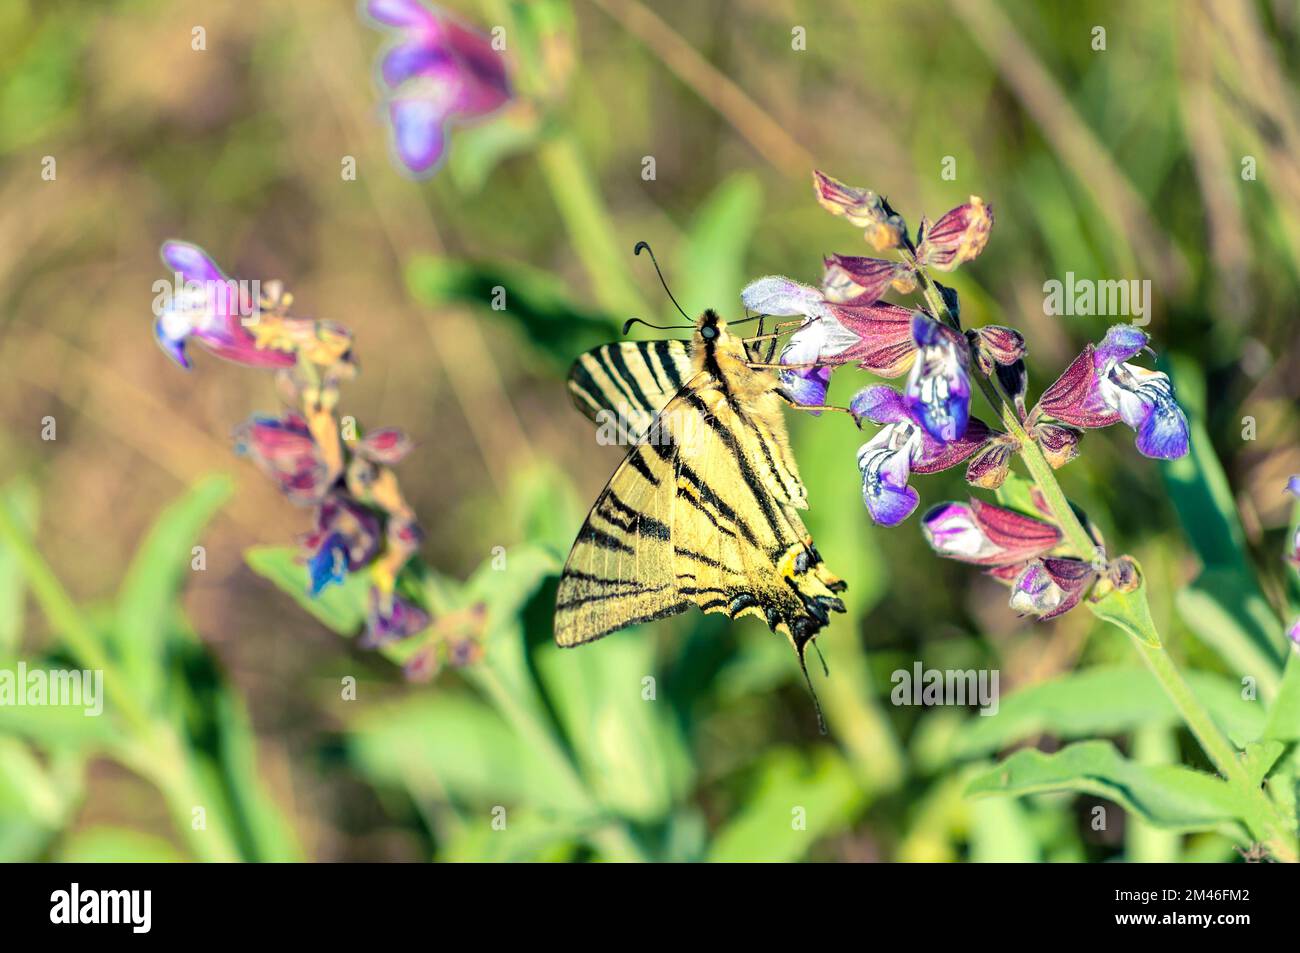 Common yellow swallowtail butterfly on sage flower Stock Photo